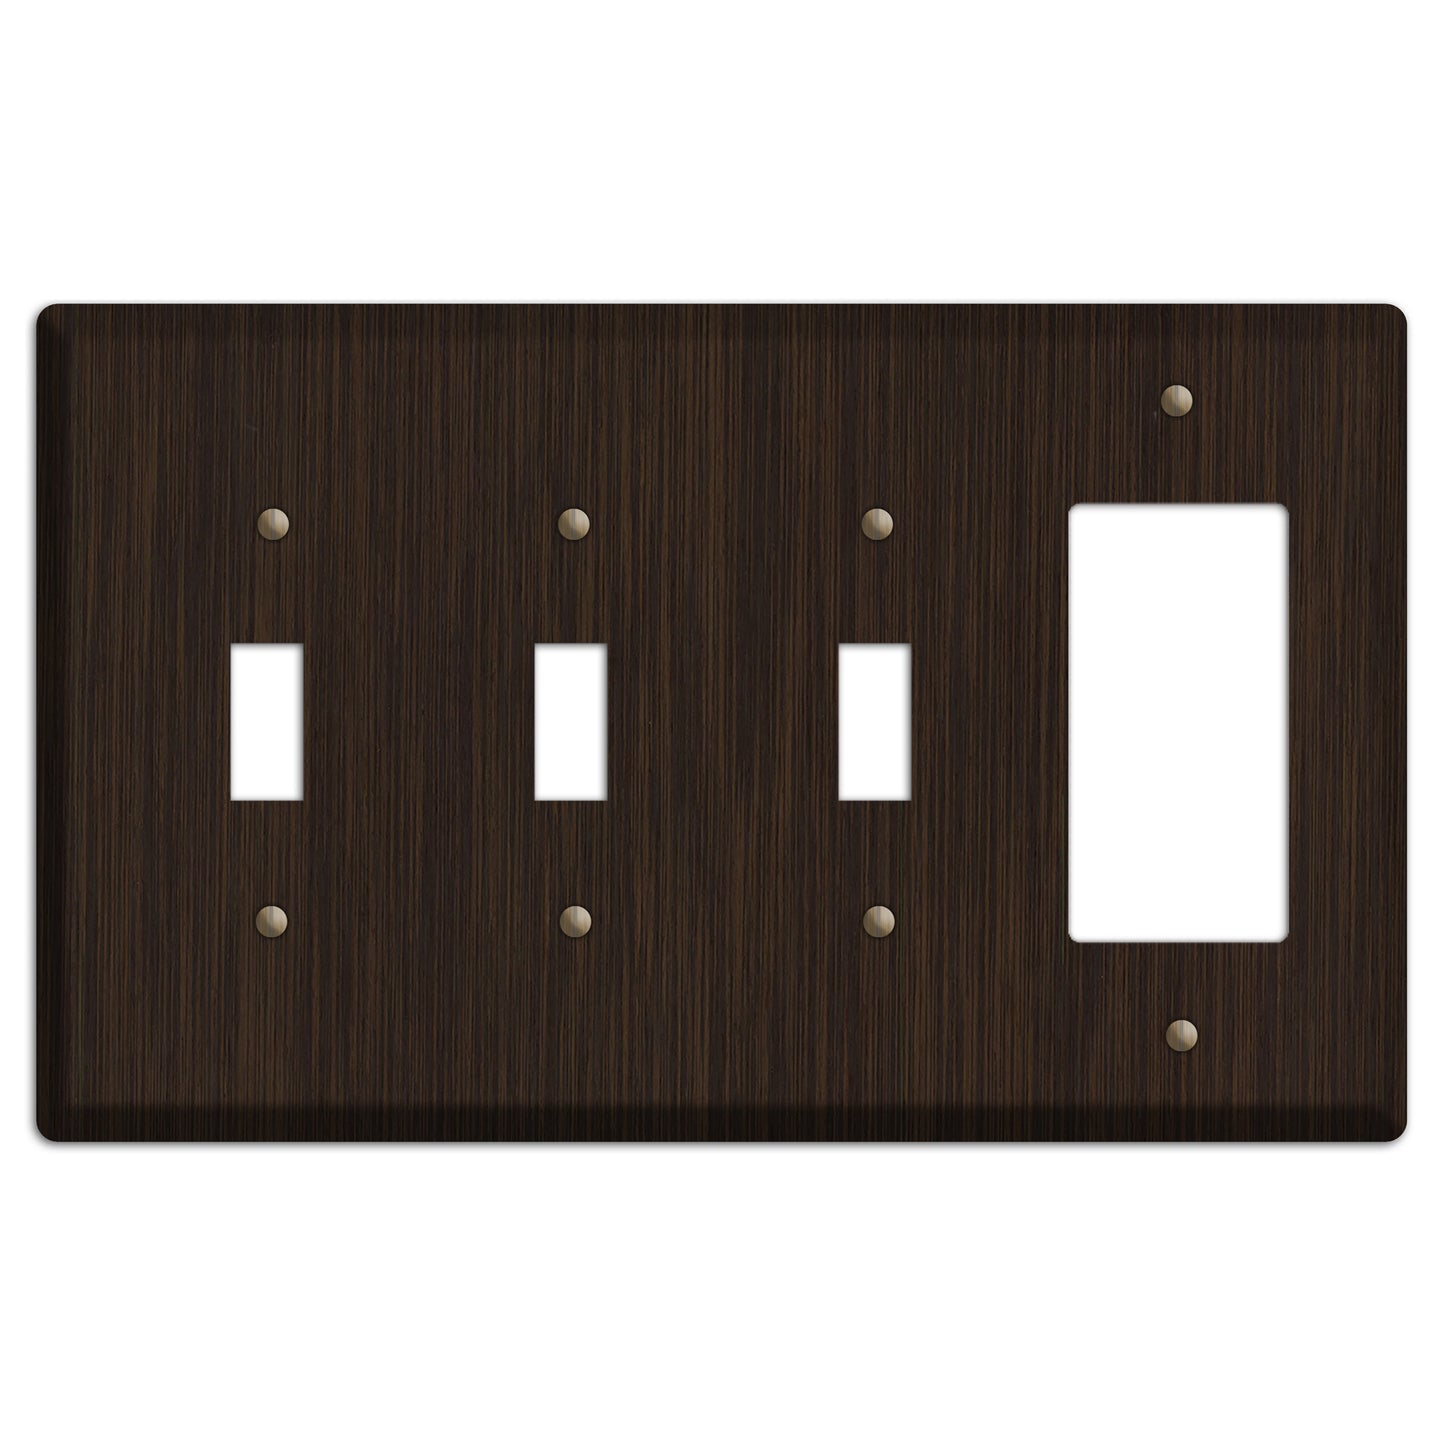 Wenge Wood 3 Toggle / Rocker Outlet Cover Plate